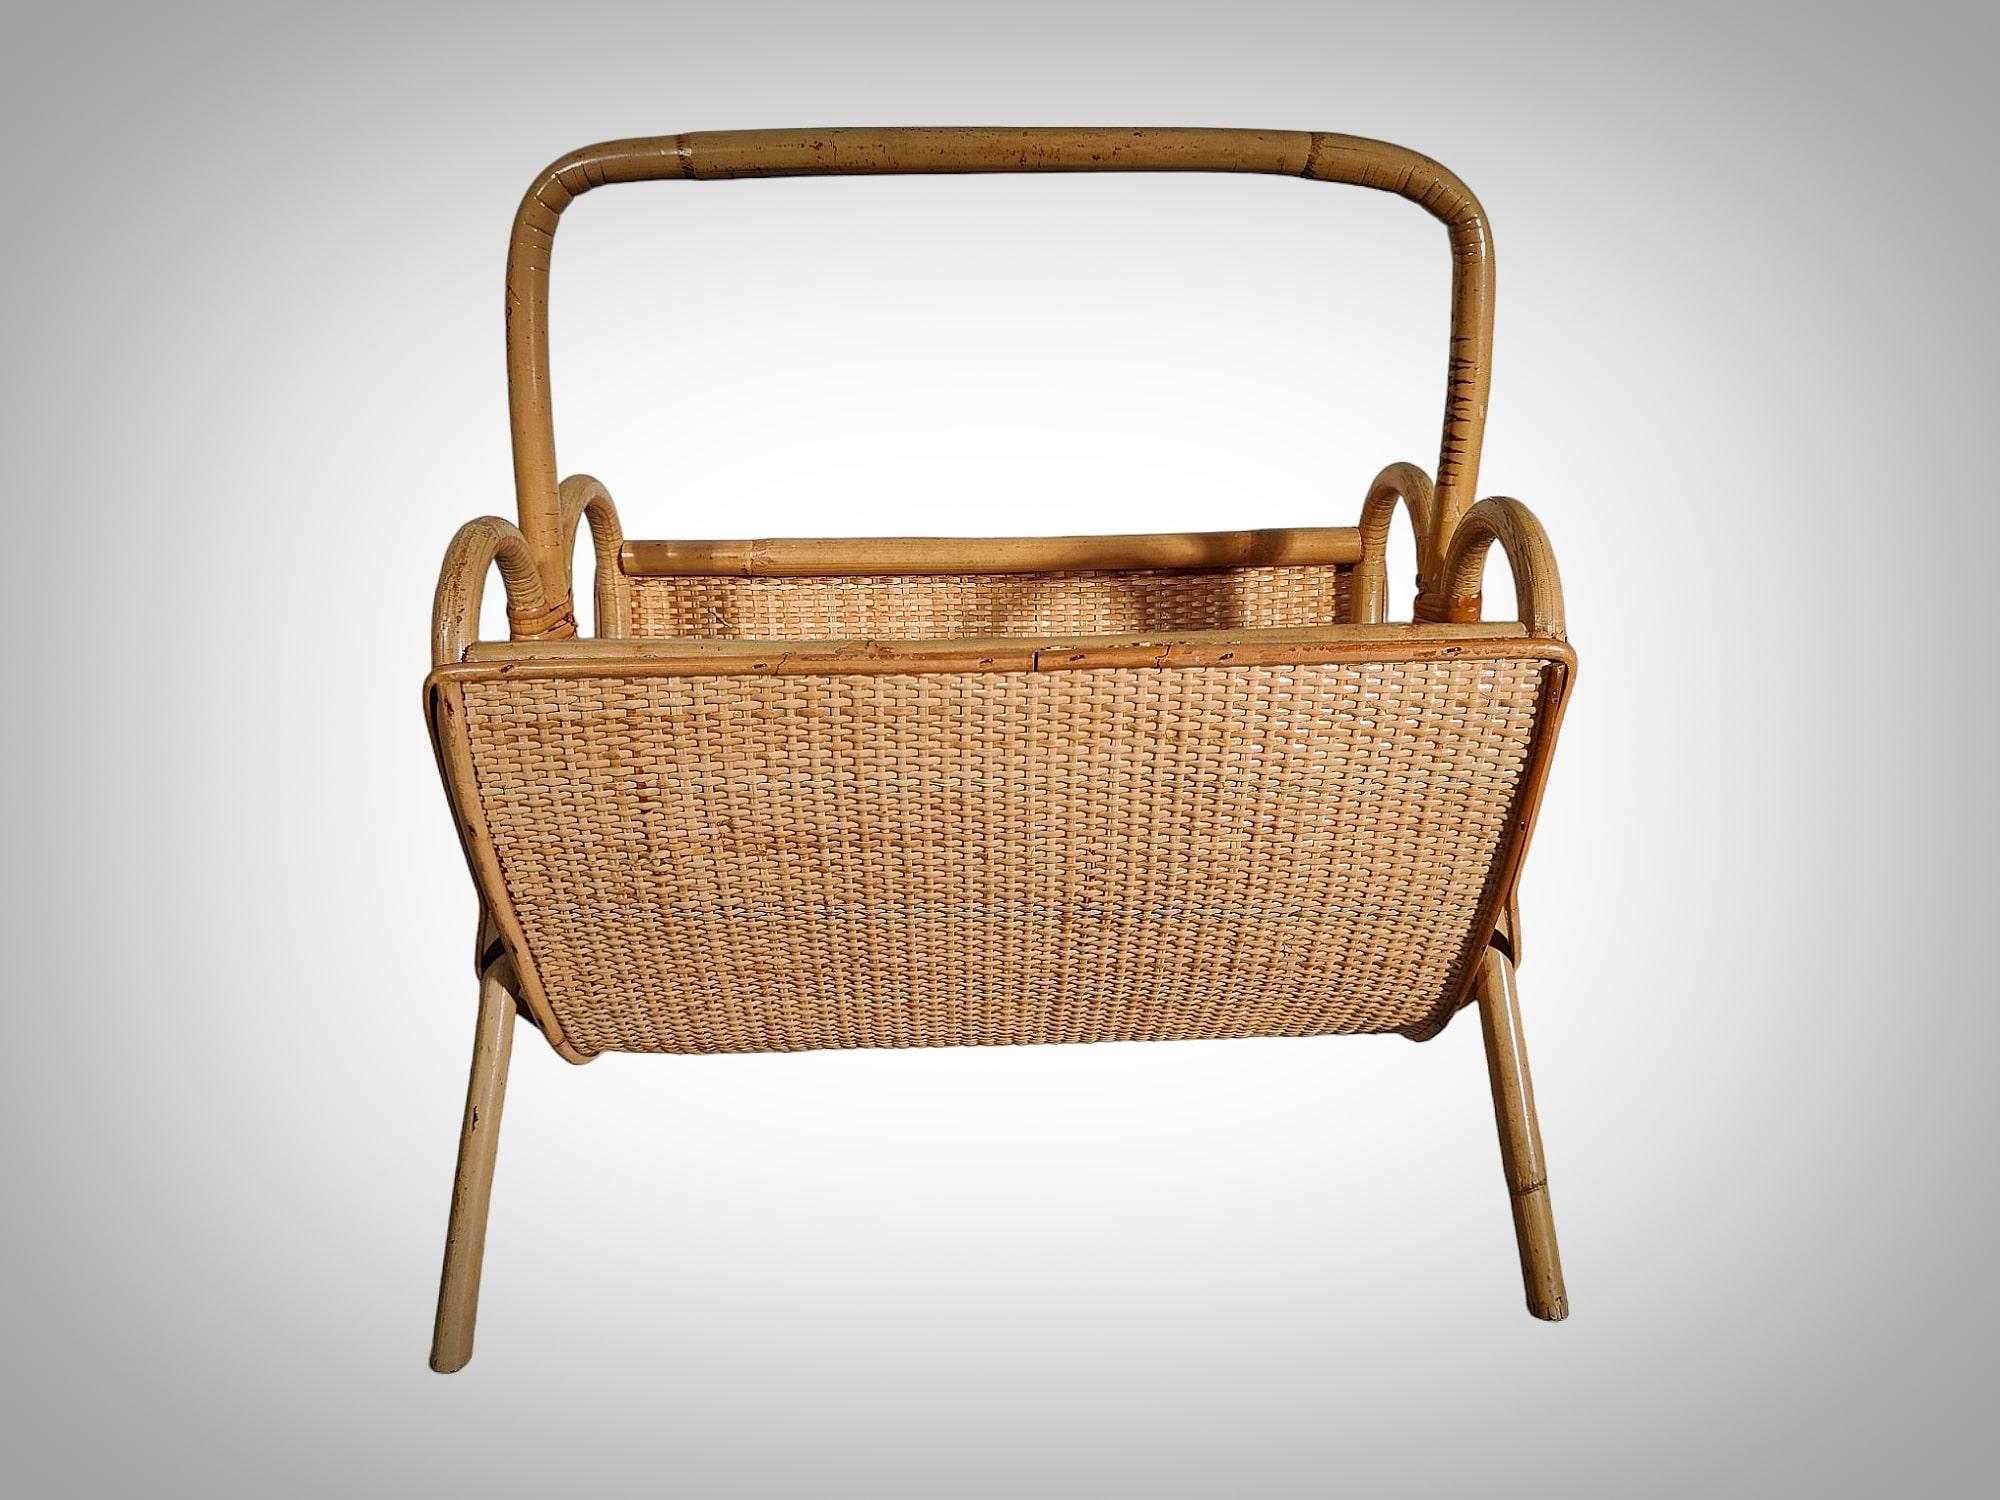 Material: Bamboo
Era: 1950s
Condition: Perfect condition
Dimensions: 50 x 45 x 25 cm (height x width x depth)
Features and Details:
This elegant magazine rack, crafted from bamboo in the 1950s, is a beautiful example of mid-century design and